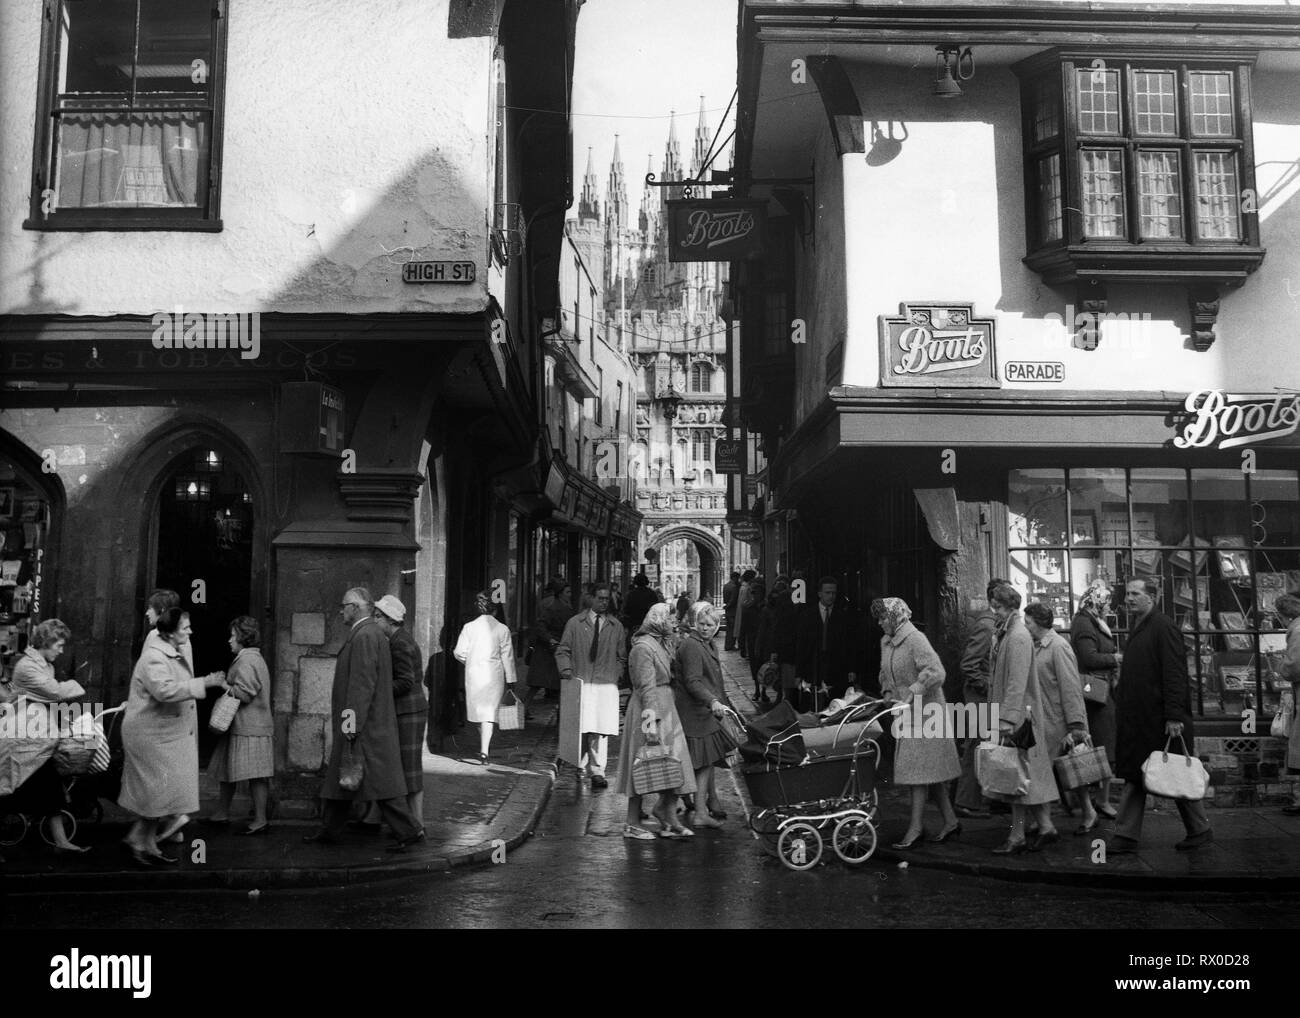 The city of Canterbury in England Uk in 1962 at the junction of High Street, Mercery Lane and Parade Stock Photo